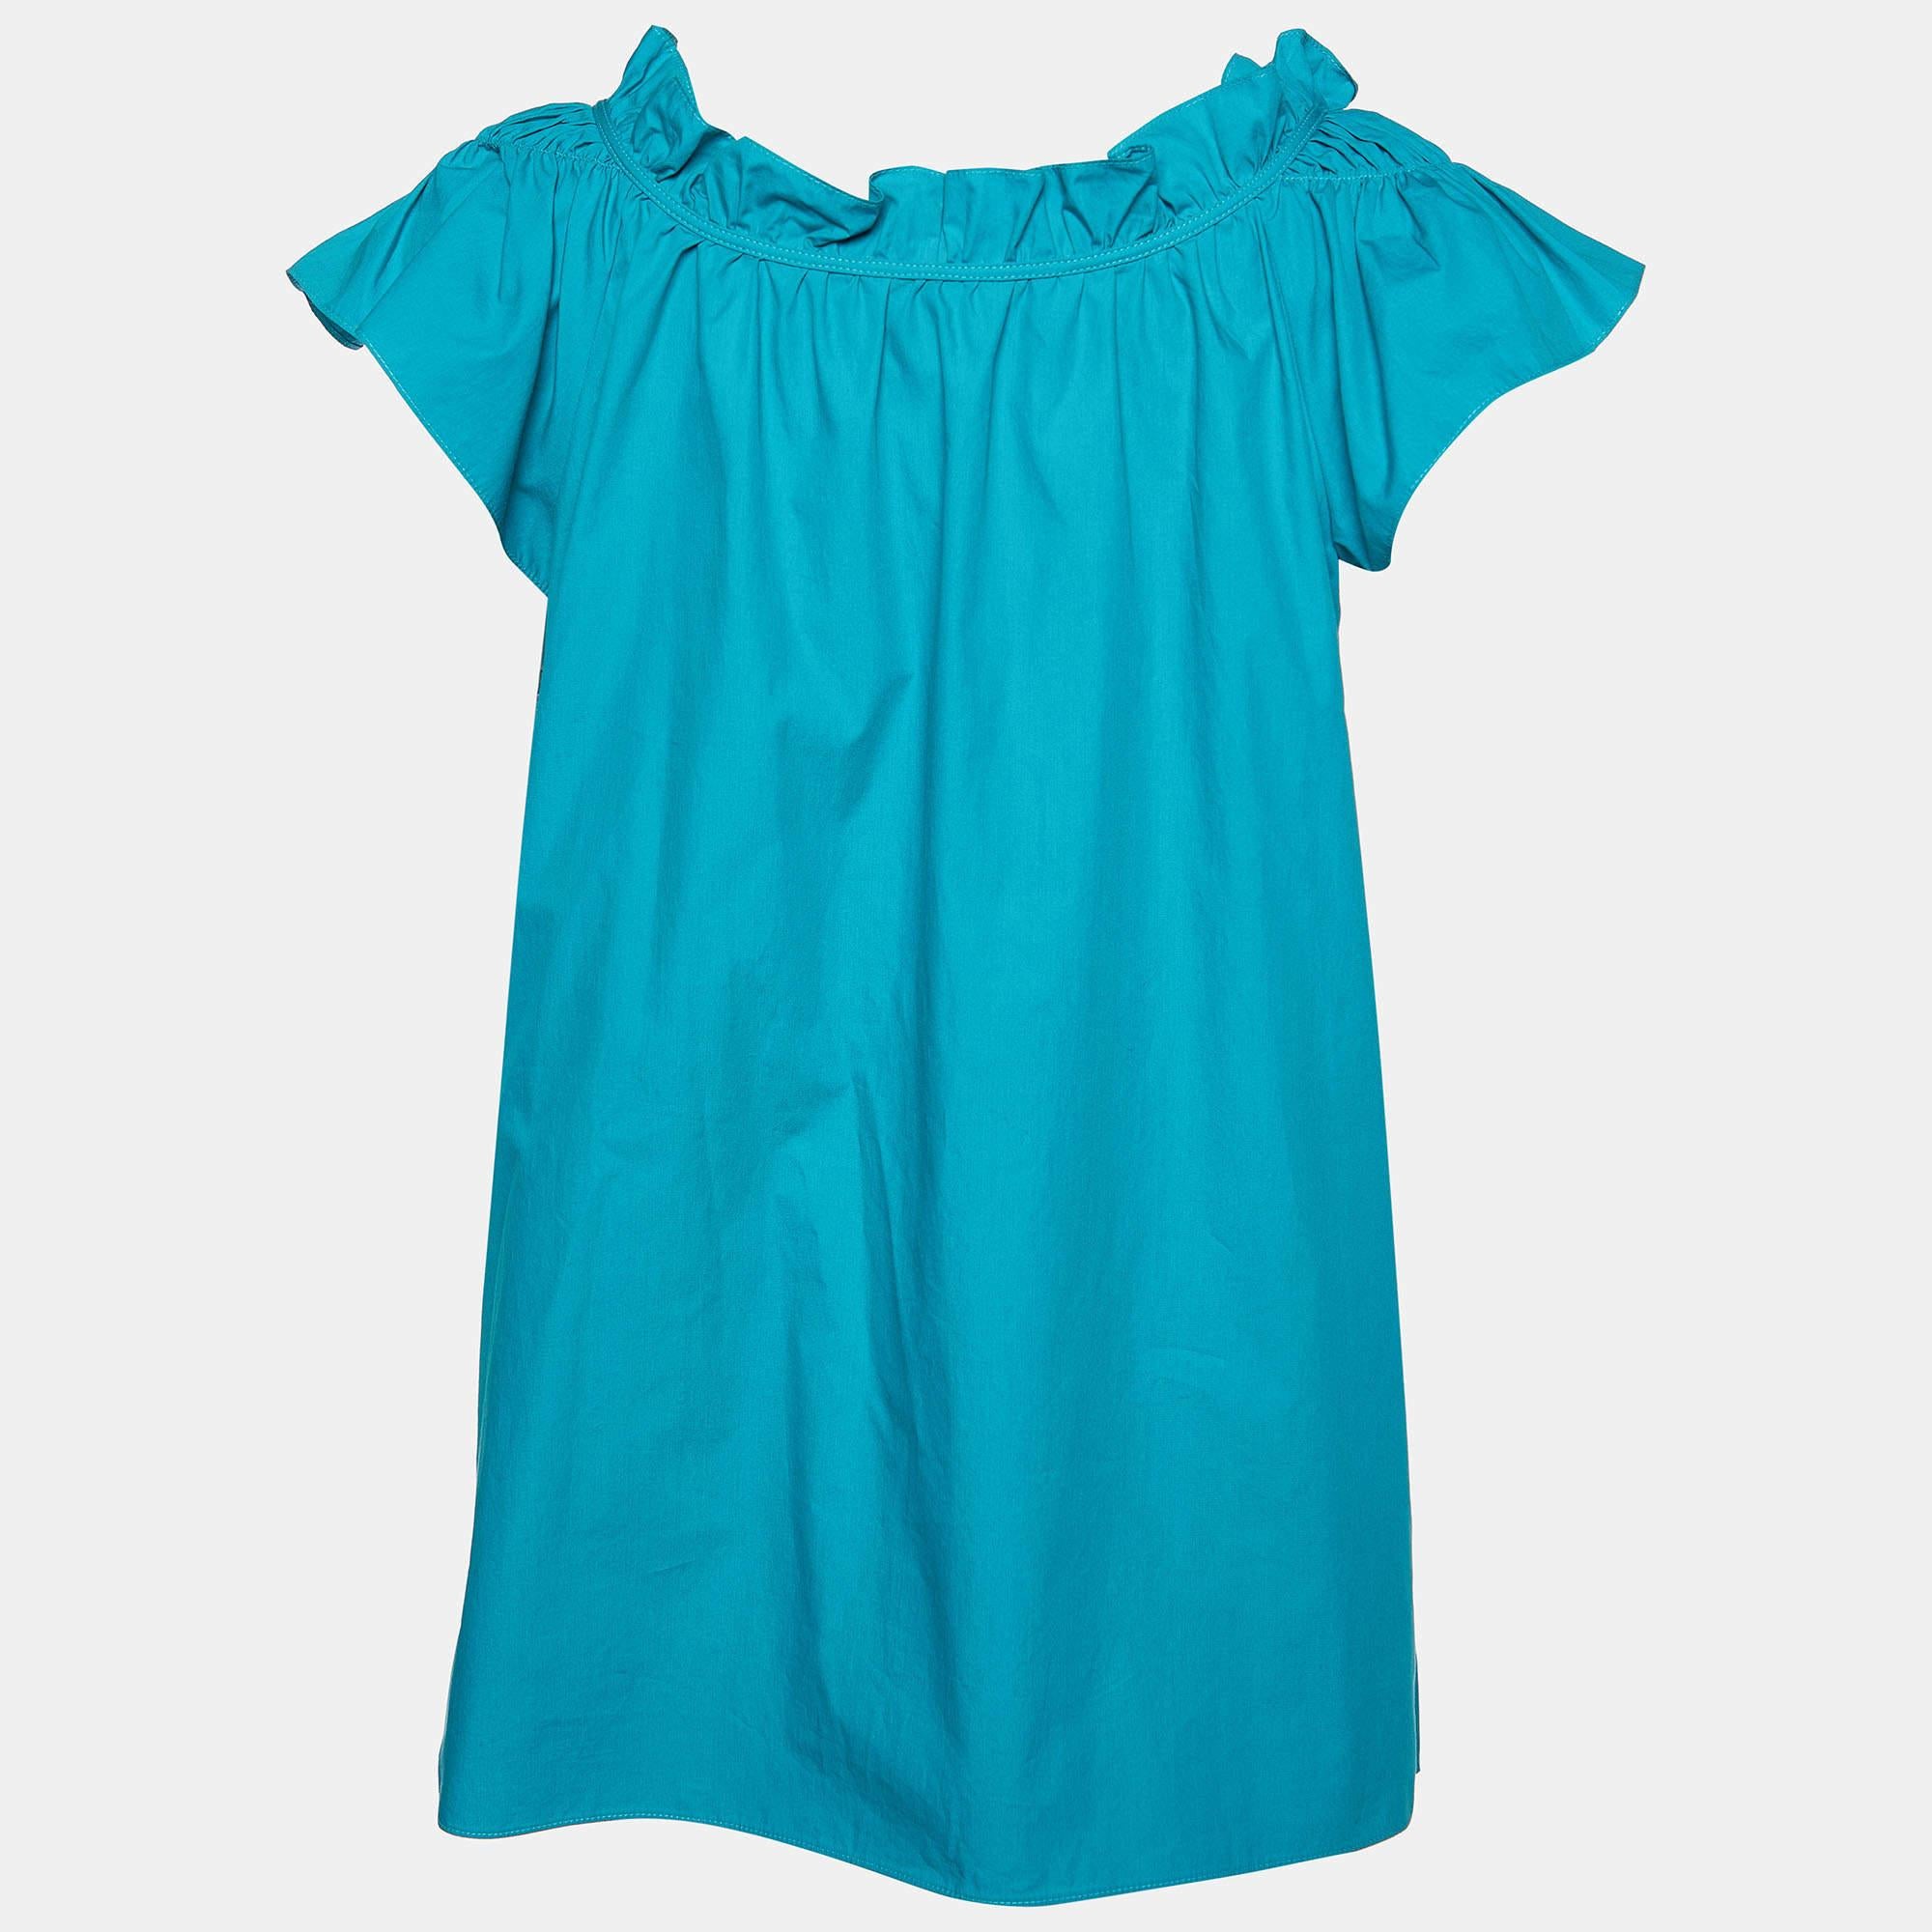 Careful tailoring, quality materials, and elegant cuts make this designer top a piece to cherish! It comes in a classic design to be easy to style.

Includes: Brand Tag